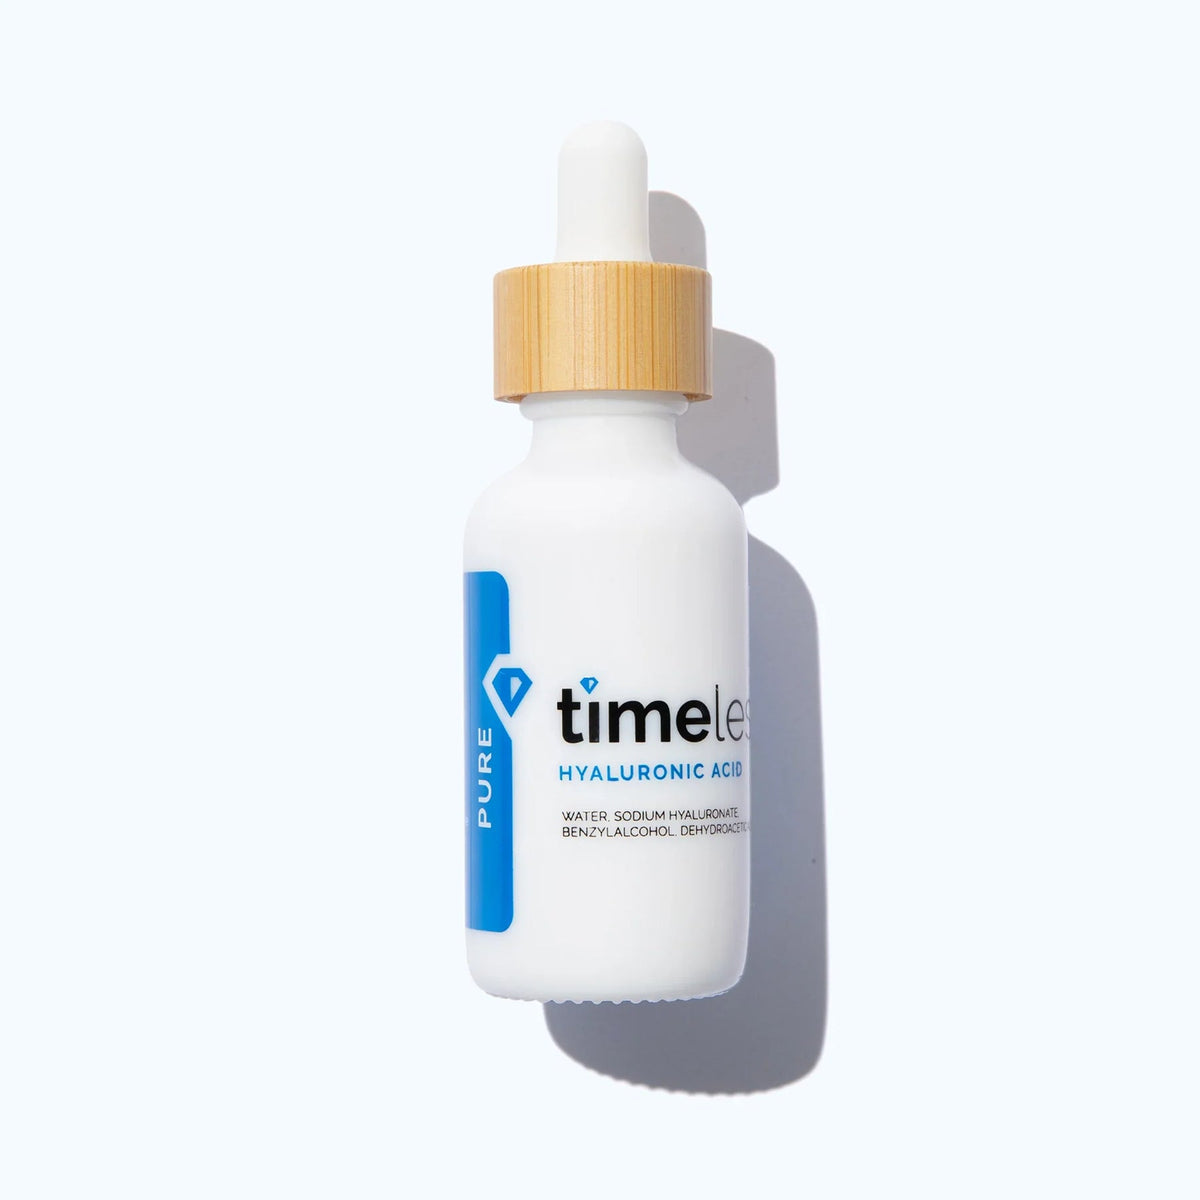 TIMELESS HYALURONIC ACID 100% PURE